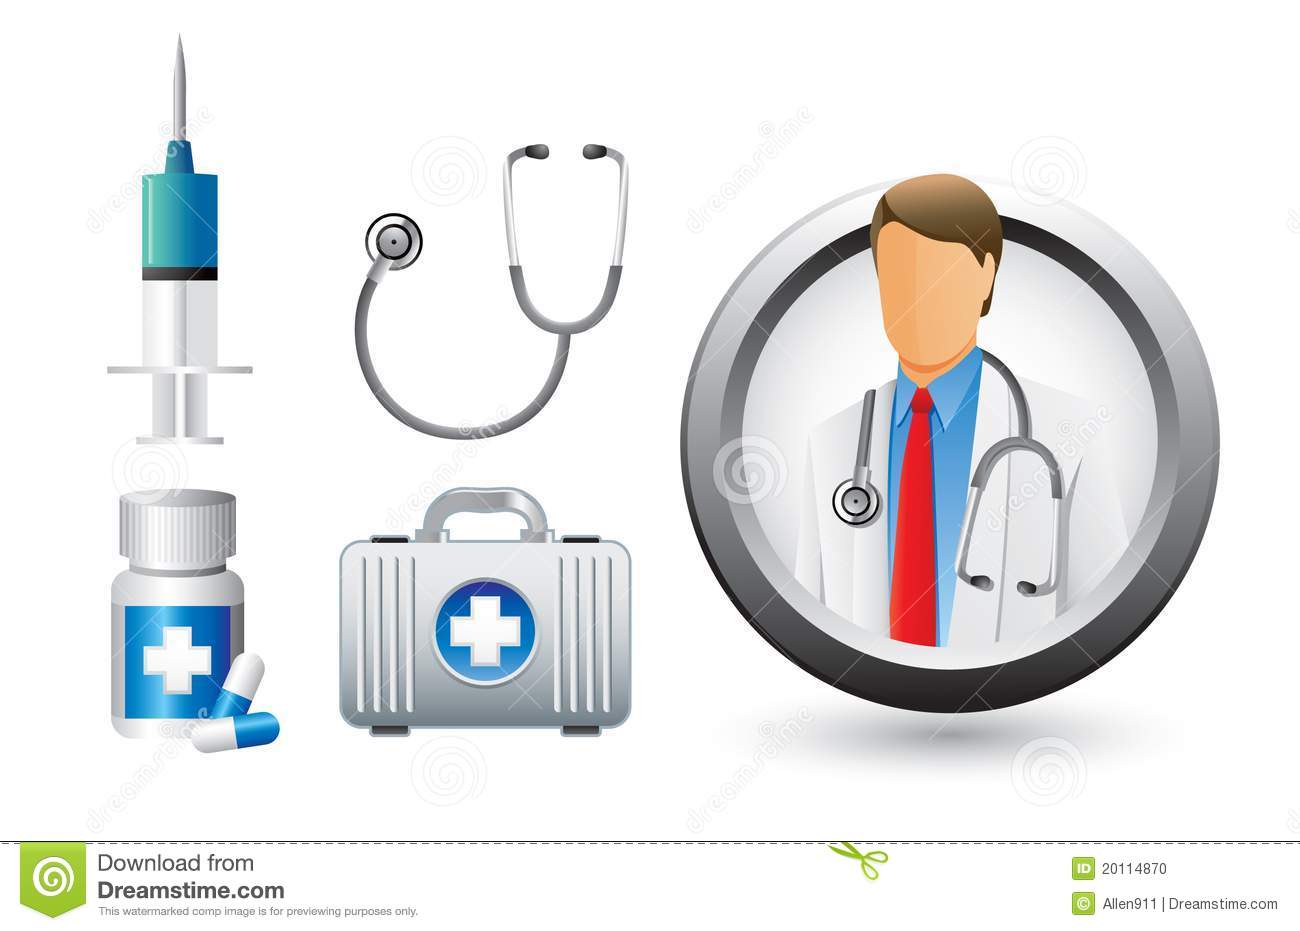     Doctor Bag Clipart Displaying 16 Images For Doctor Bag Clipart Toolbar